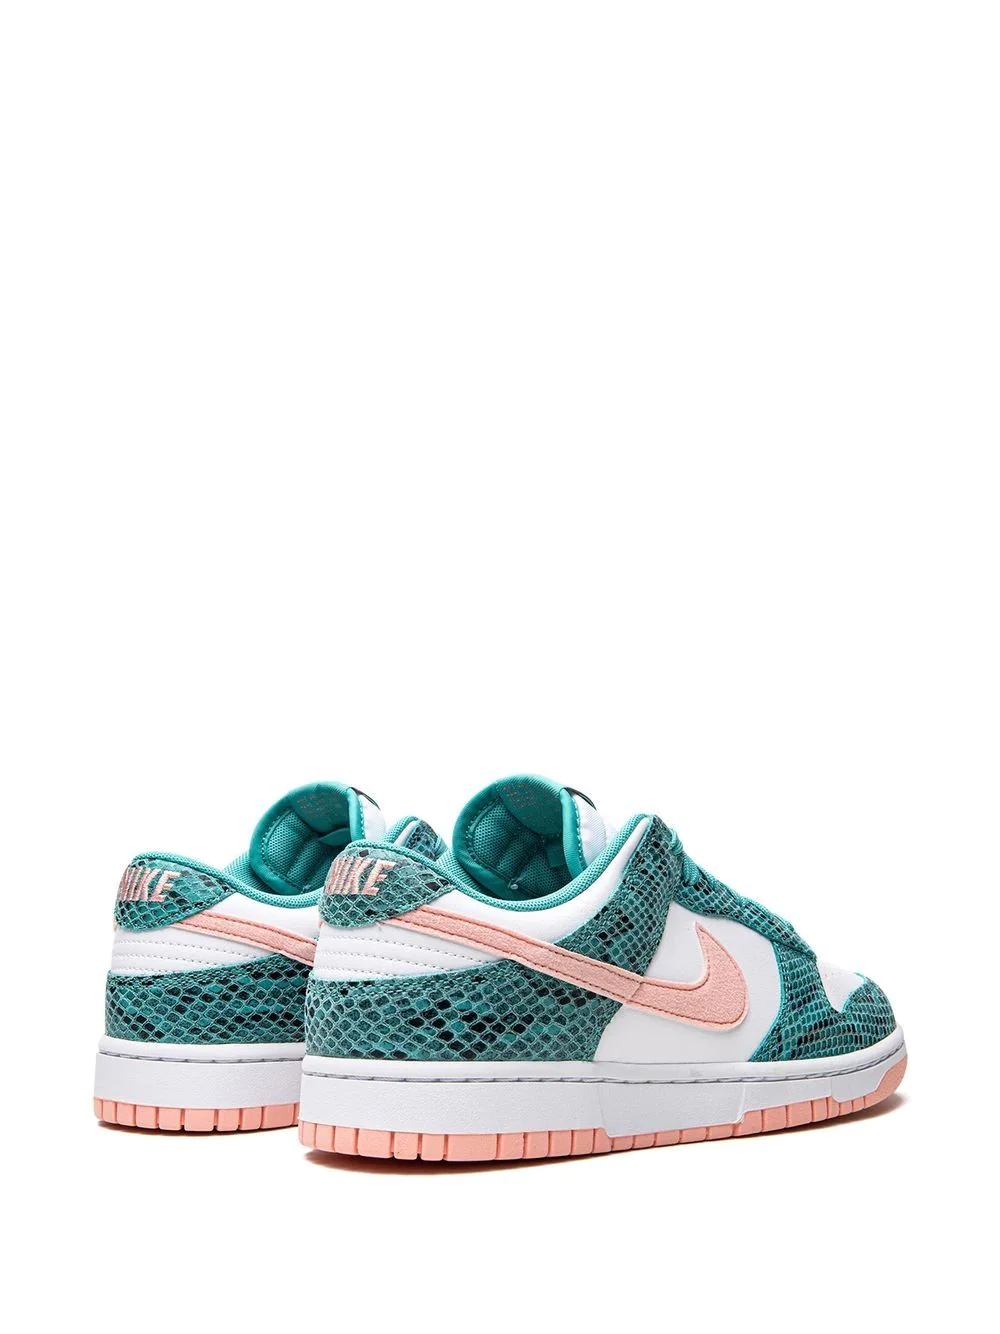 Dunk Low Snakeskin "Washed Teal/Bleached Coral" sneakers - 3